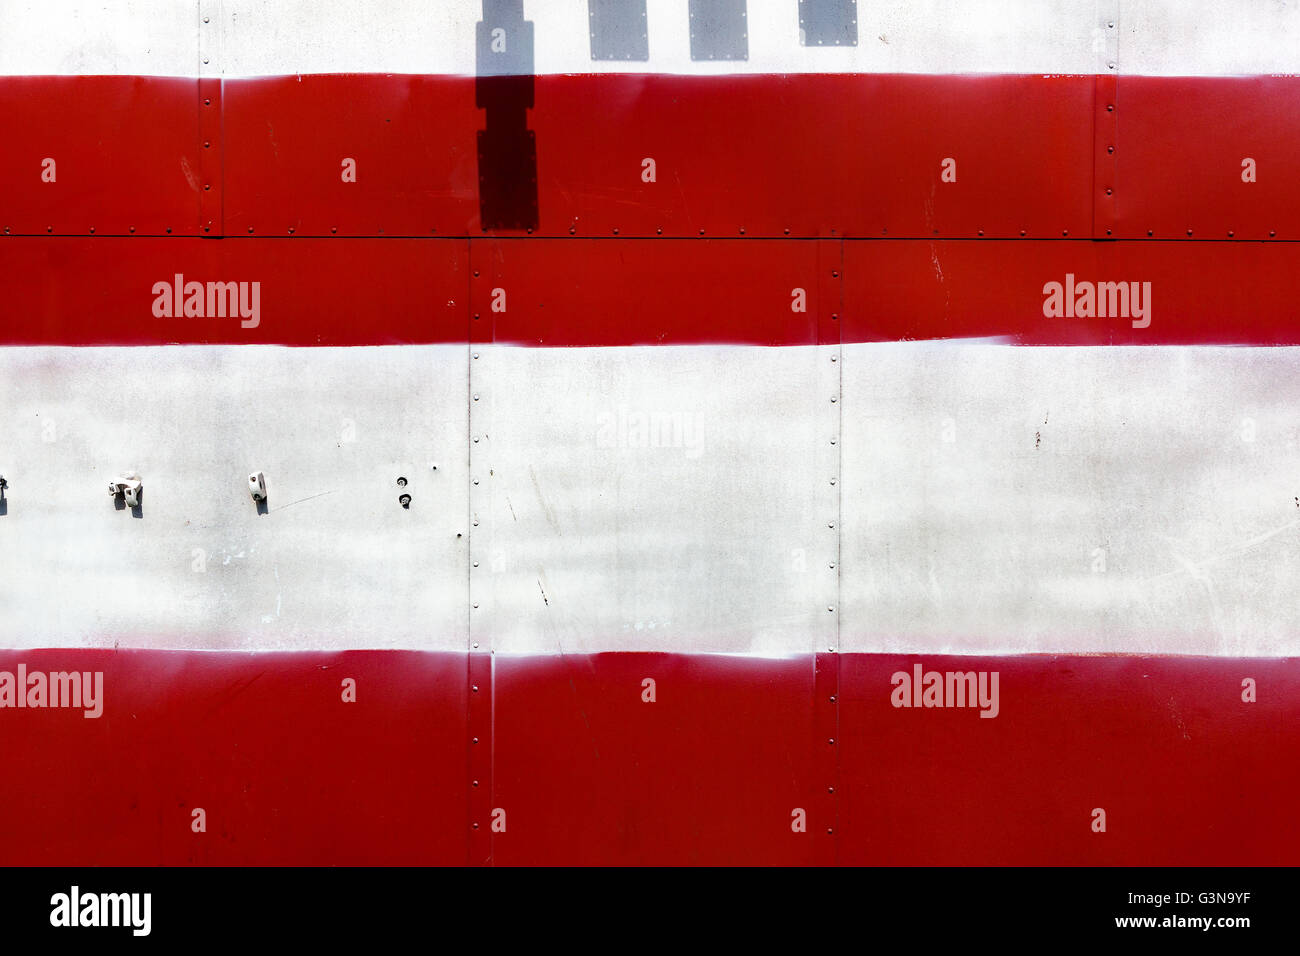 Weathered painted in red and white colors metal panel. Stock Photo